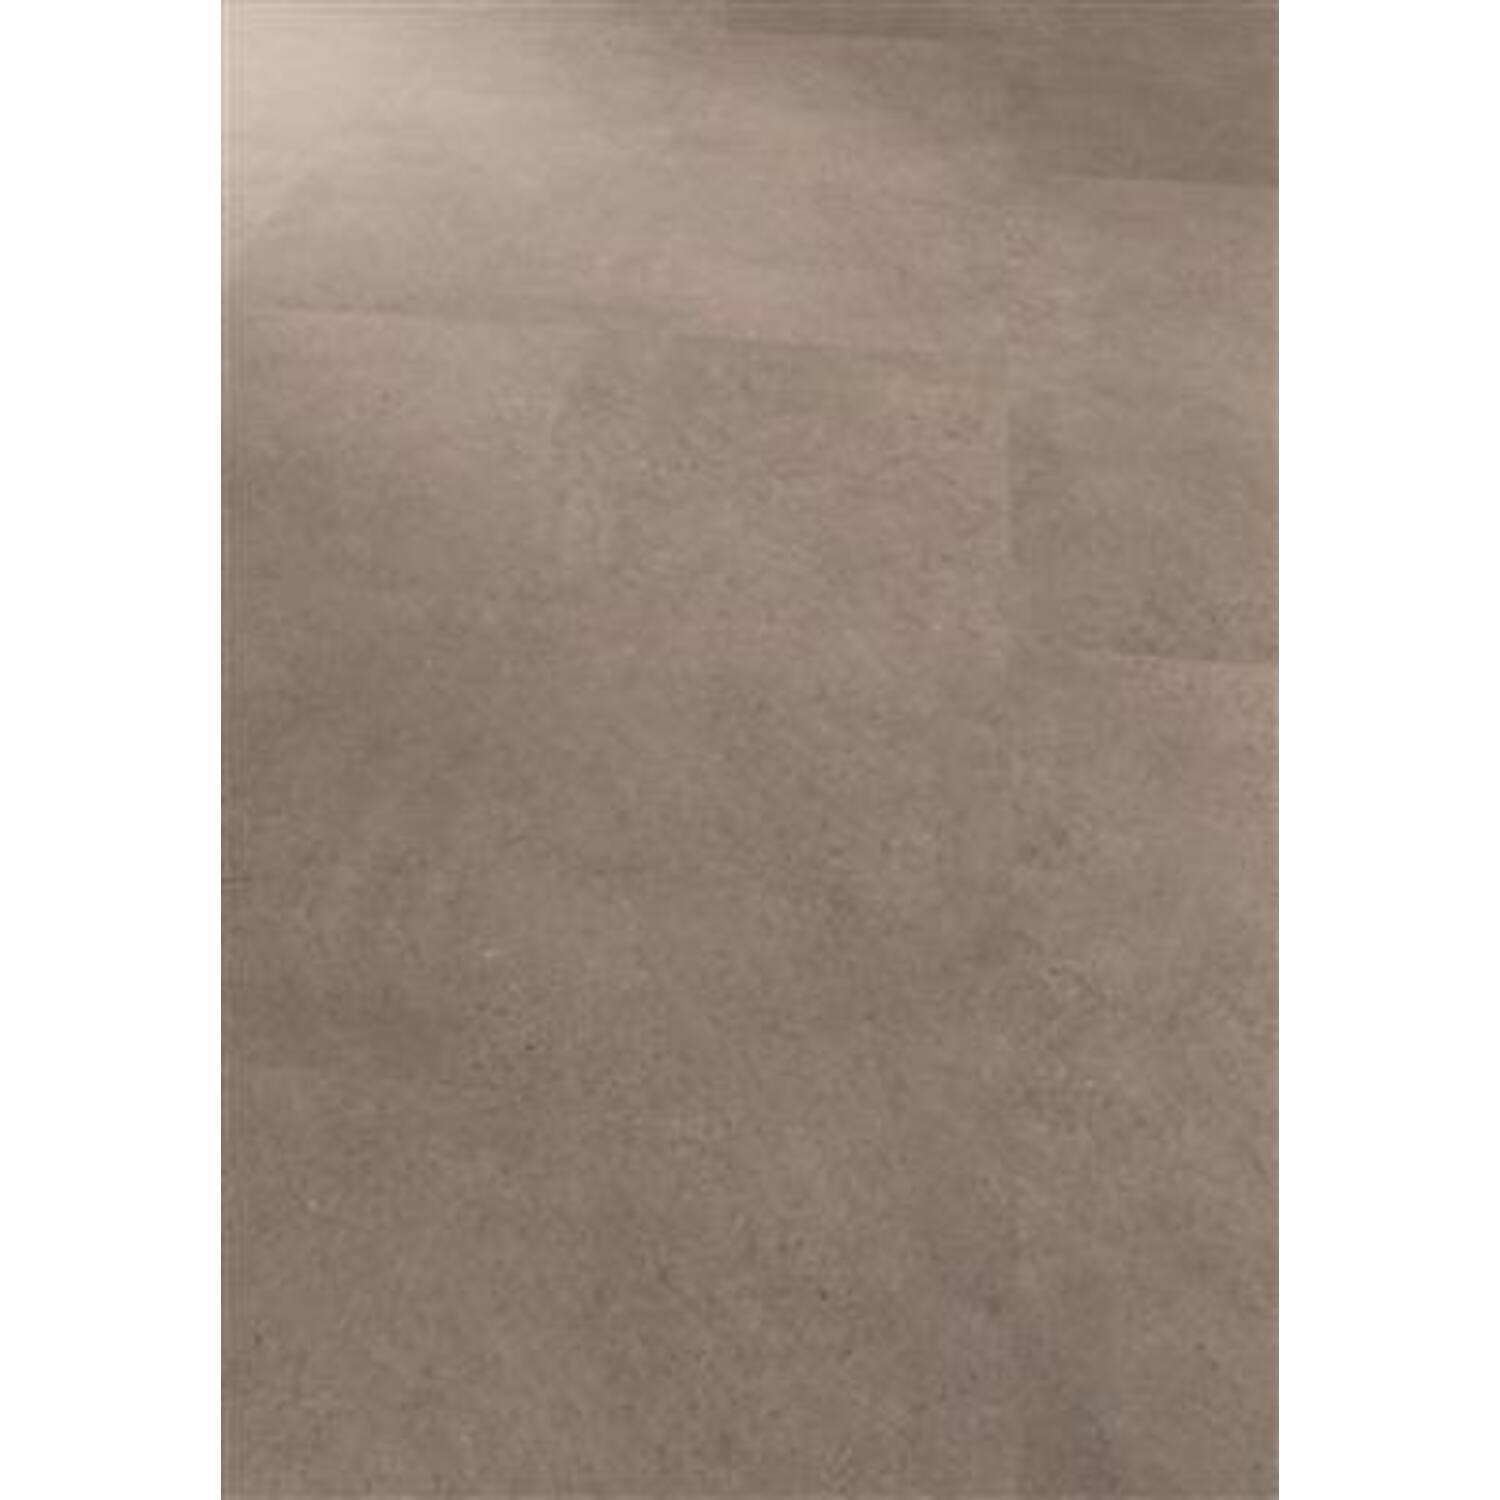 EXPONA Commercial Style 5064 Warm Grey Concrete